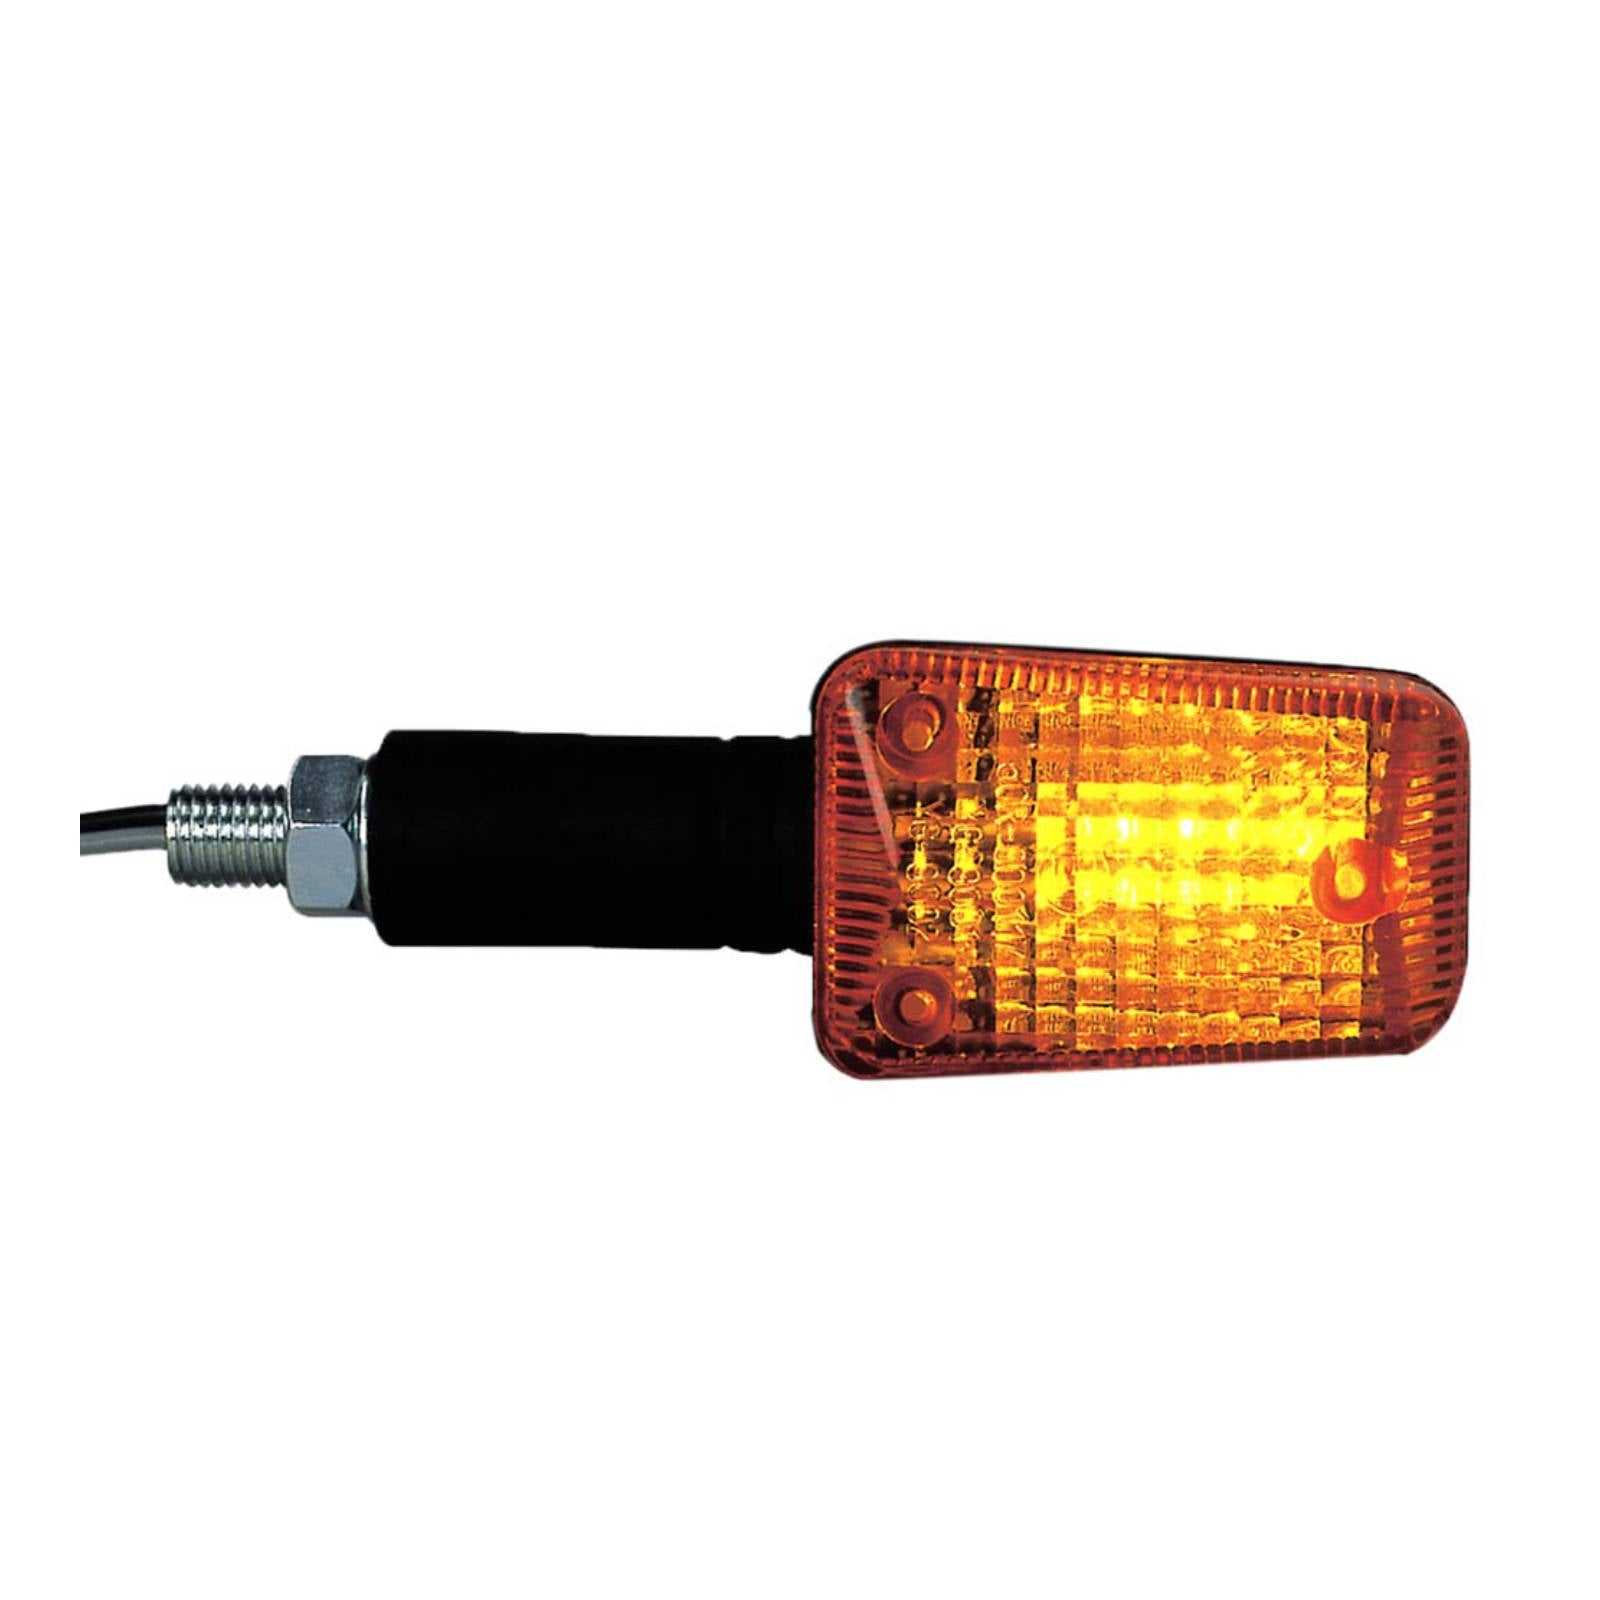 Oxford, OXFORD INDICATOR - RECTANGLE SHORT BLK (PAIR) LED